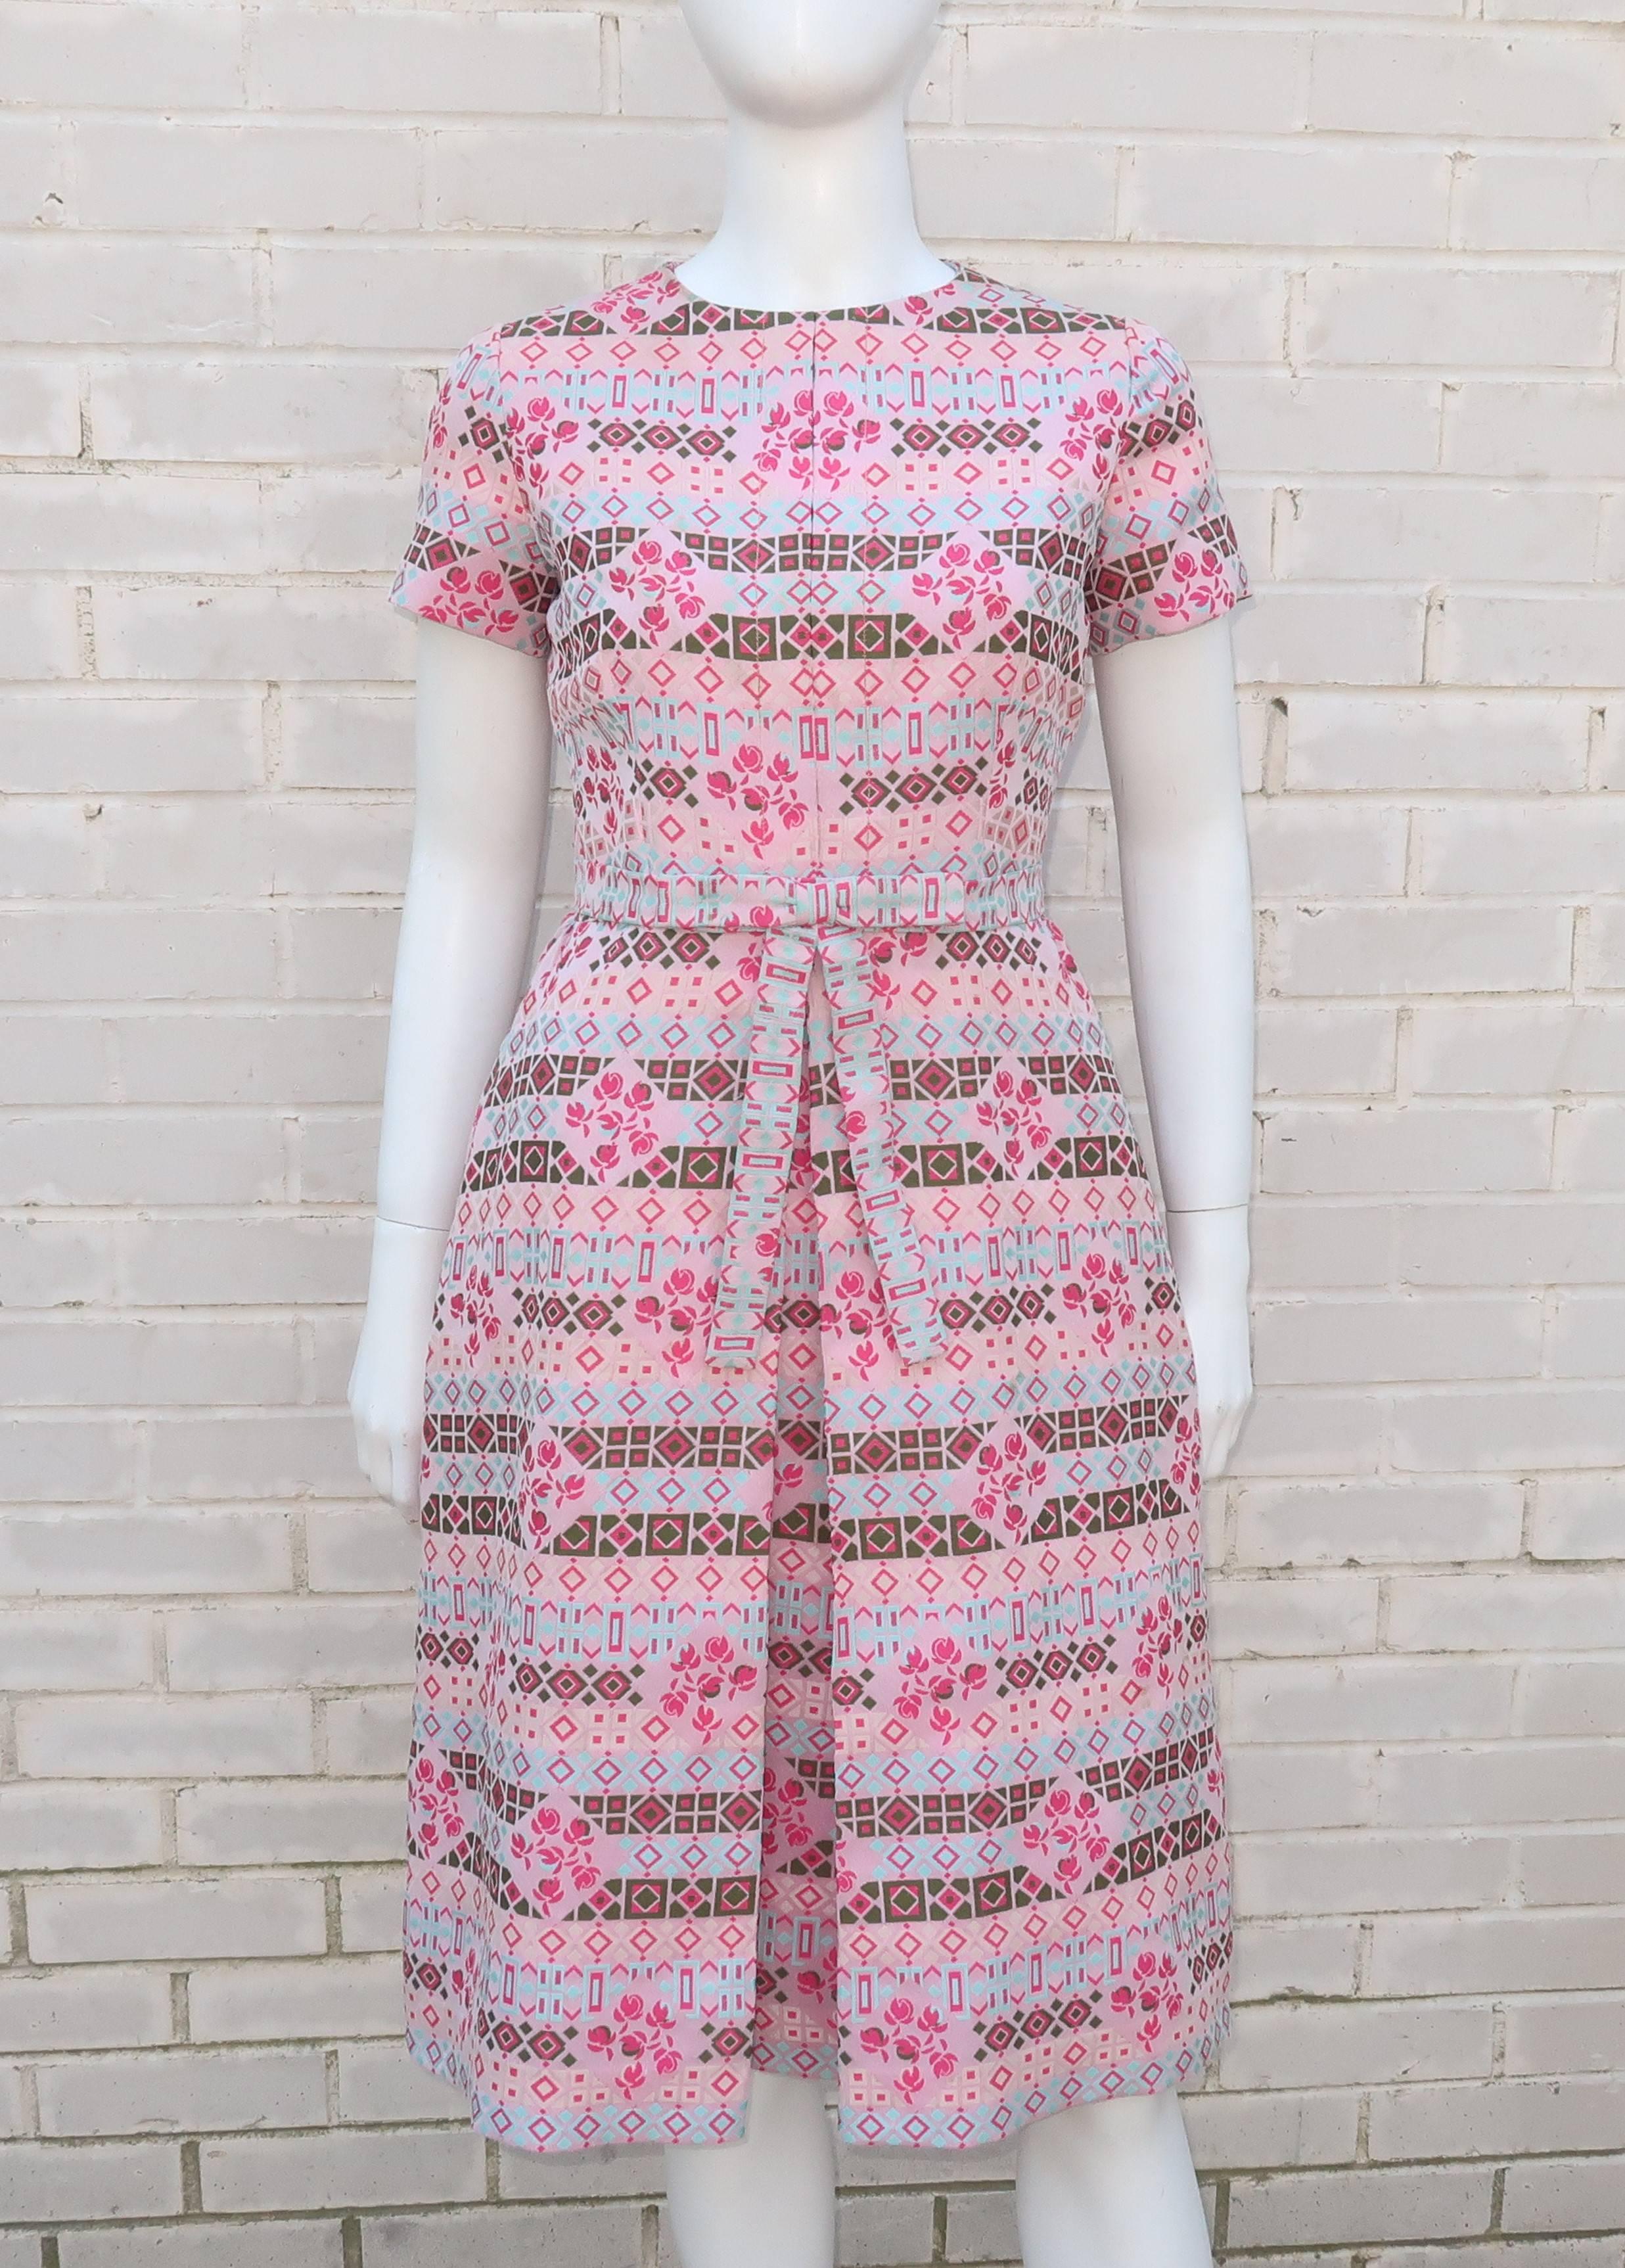 This C.1970 dress from Chester Weinberg is a glorious vision of graphic pink delights.  The geometric design on the brocade style fabric incorporates shades of pink including hot and powder with olive green and pale aqua blue all in a subtle floral